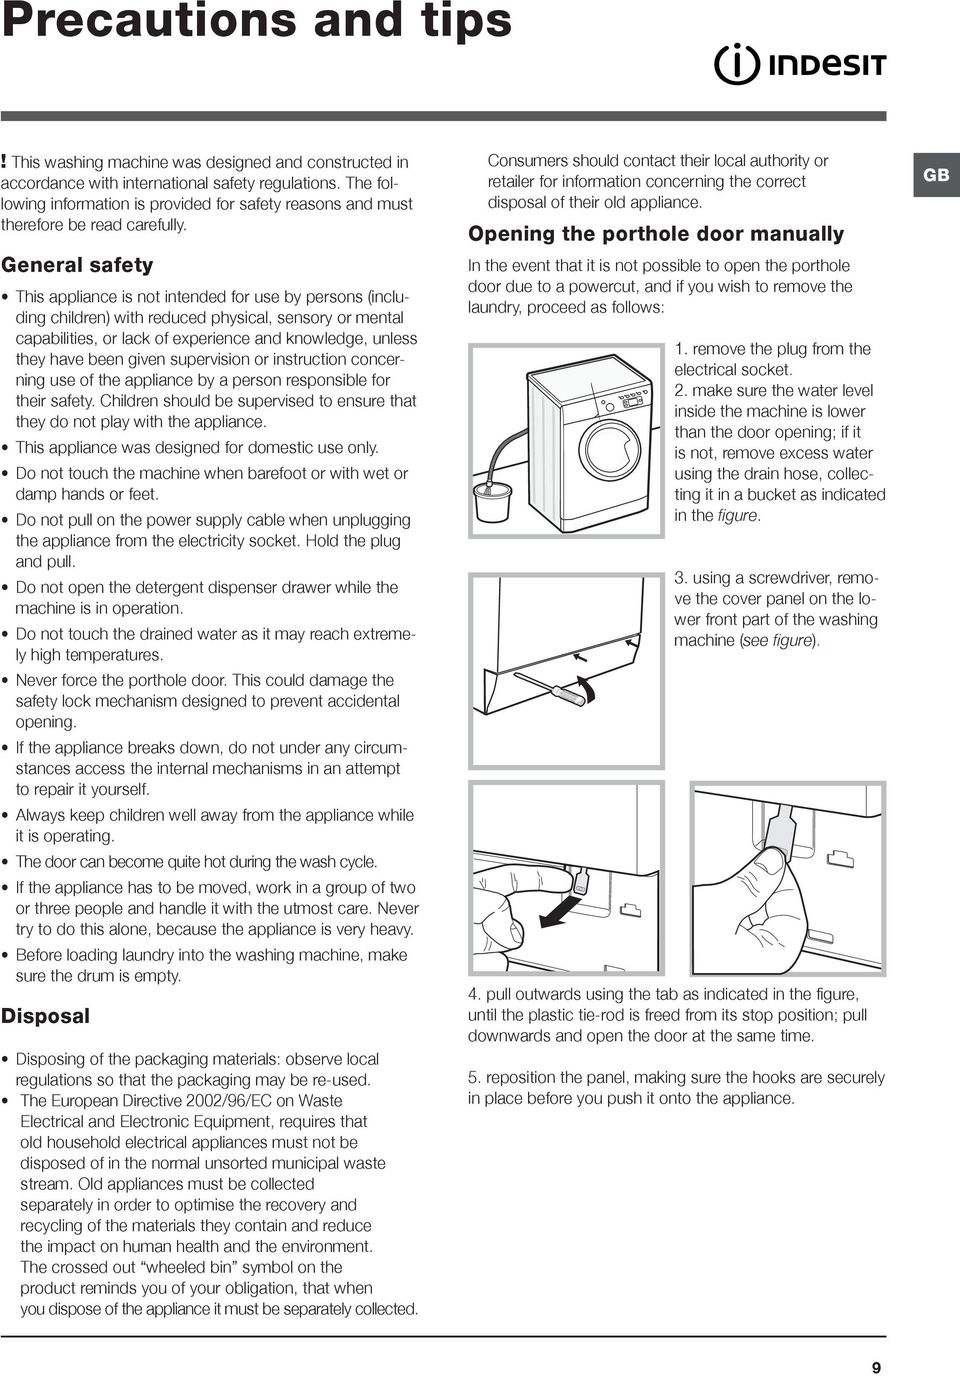 General safety This appliance is not intended for use by persons (including children) with reduced physical, sensory or mental capabilities, or lack of experience and knowledge, unless they have been